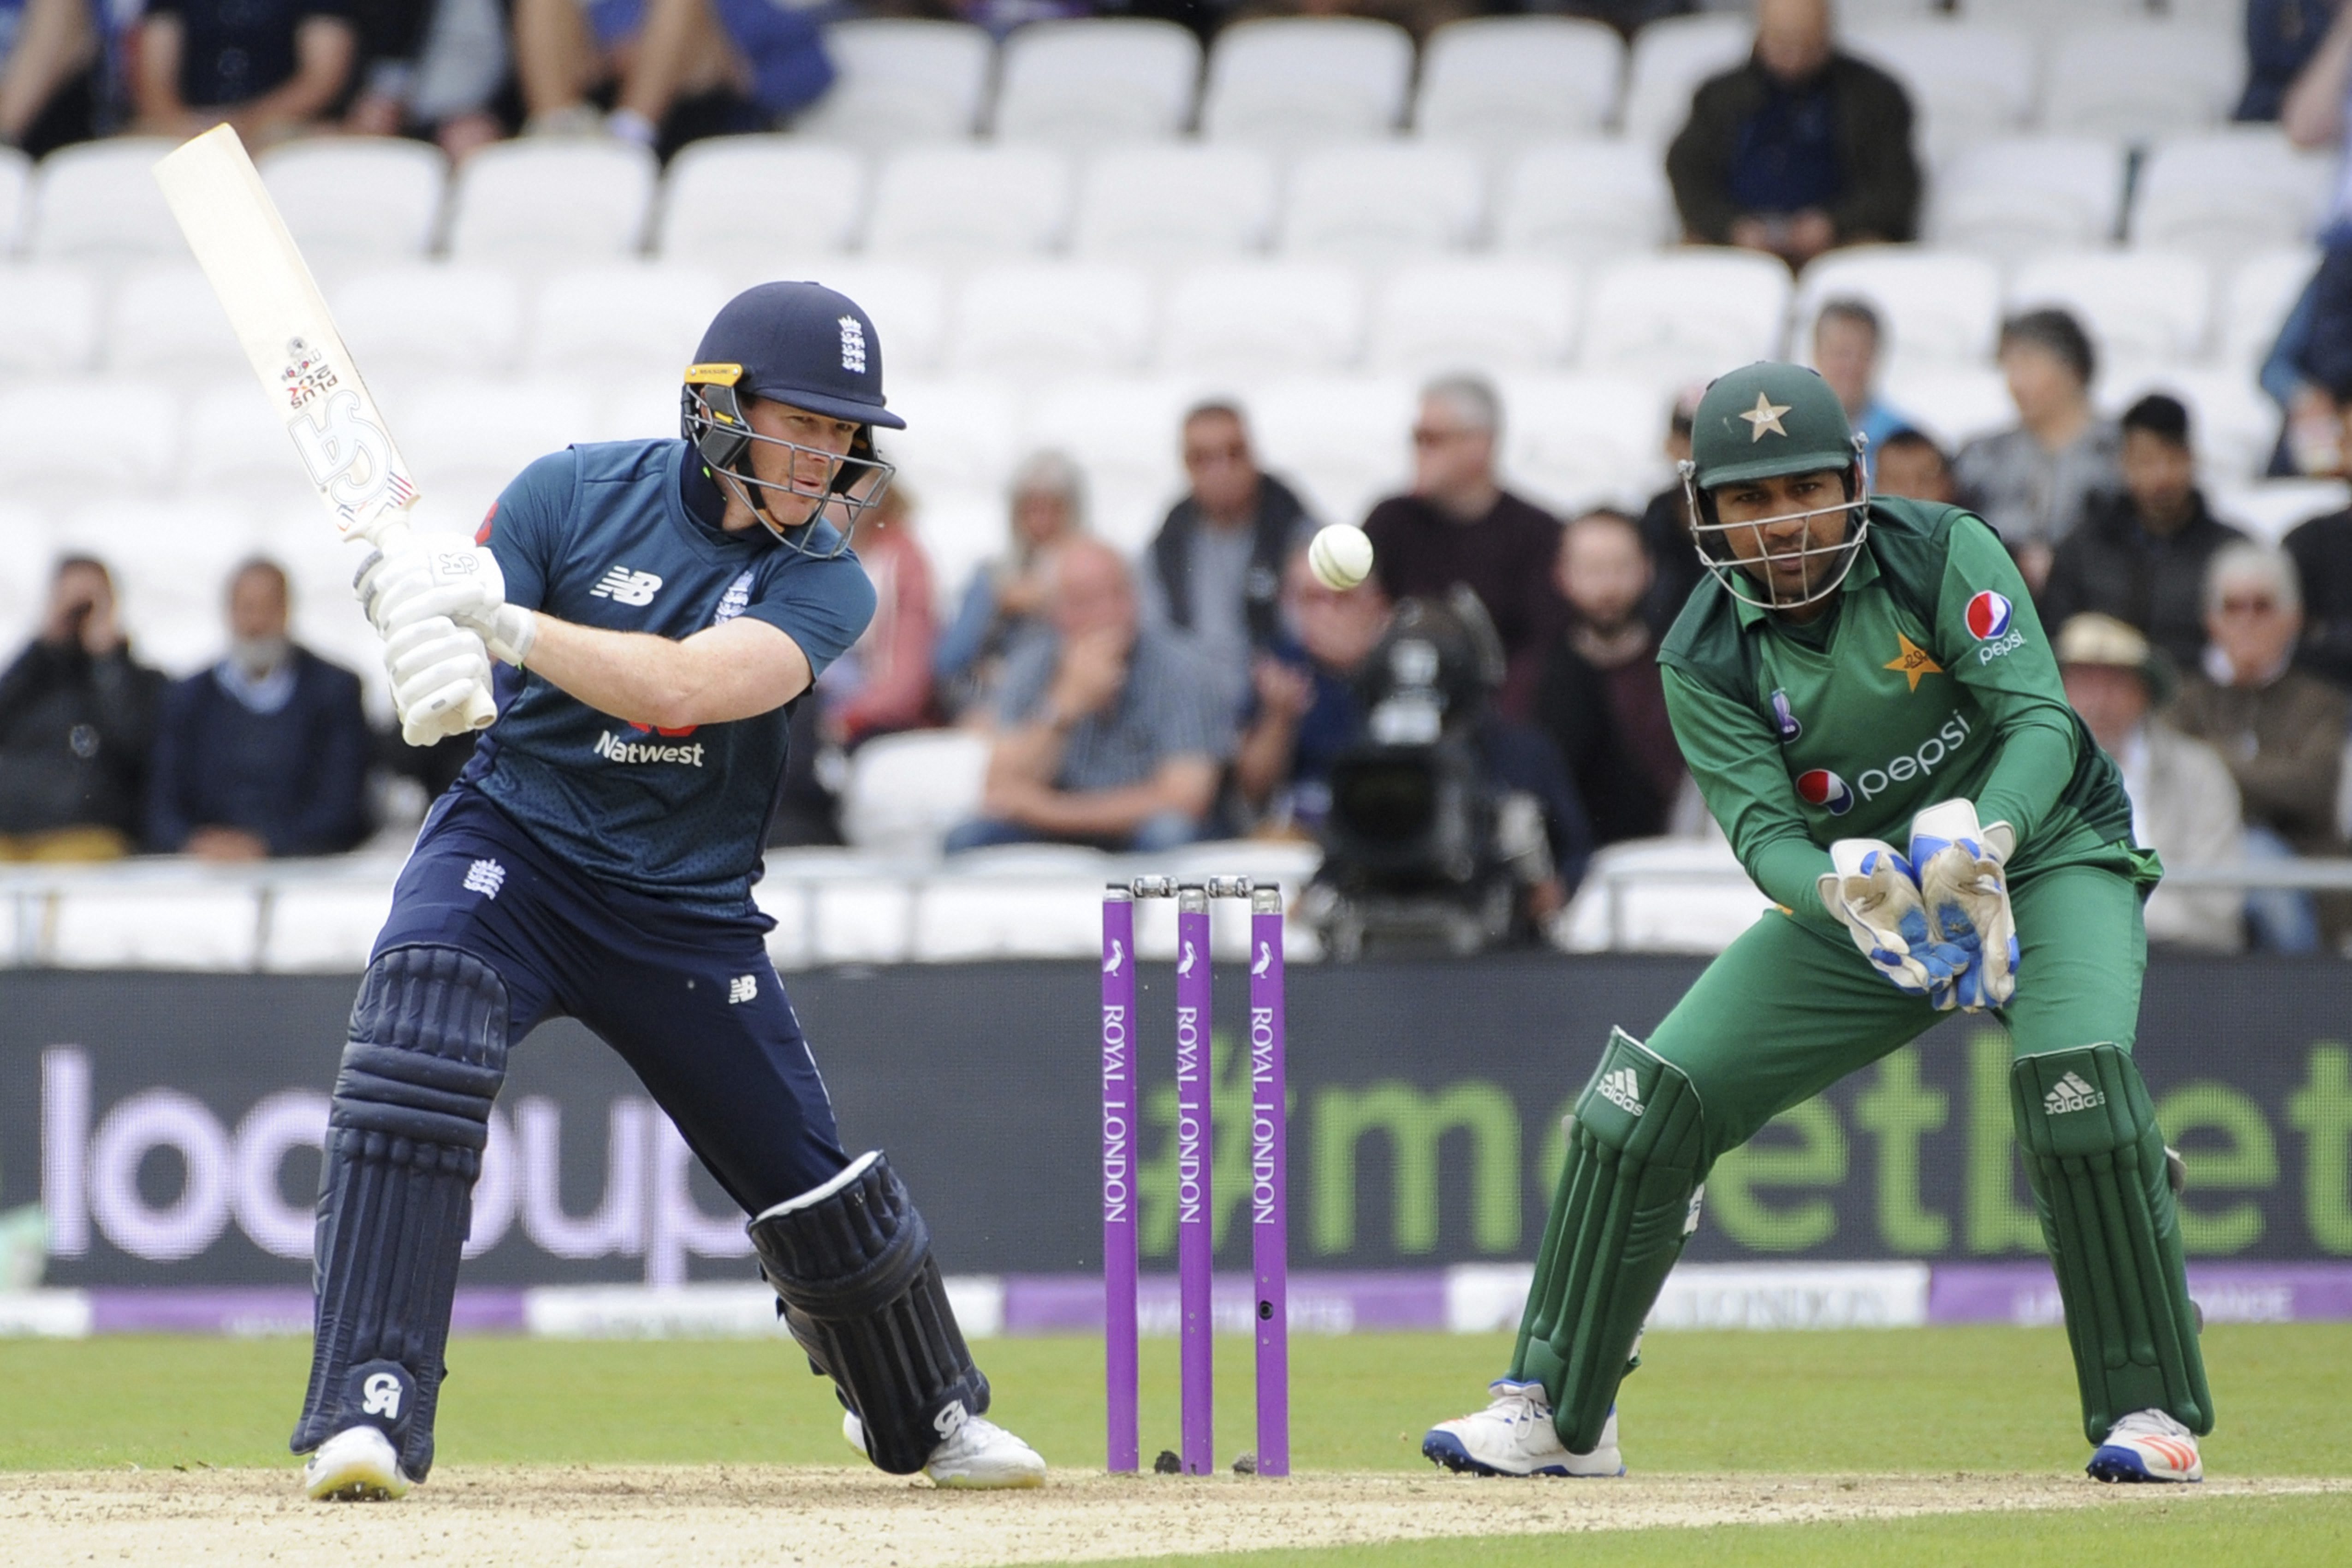 England's Eoin Morgan, left, plays a shot while Pakistan's wicketkeeper Sarfraz Ahmed tries to catch the ball during the Fifth One Day International cricket match between England and Pakistan at Emerald Headingley in Leeds, England - PTI